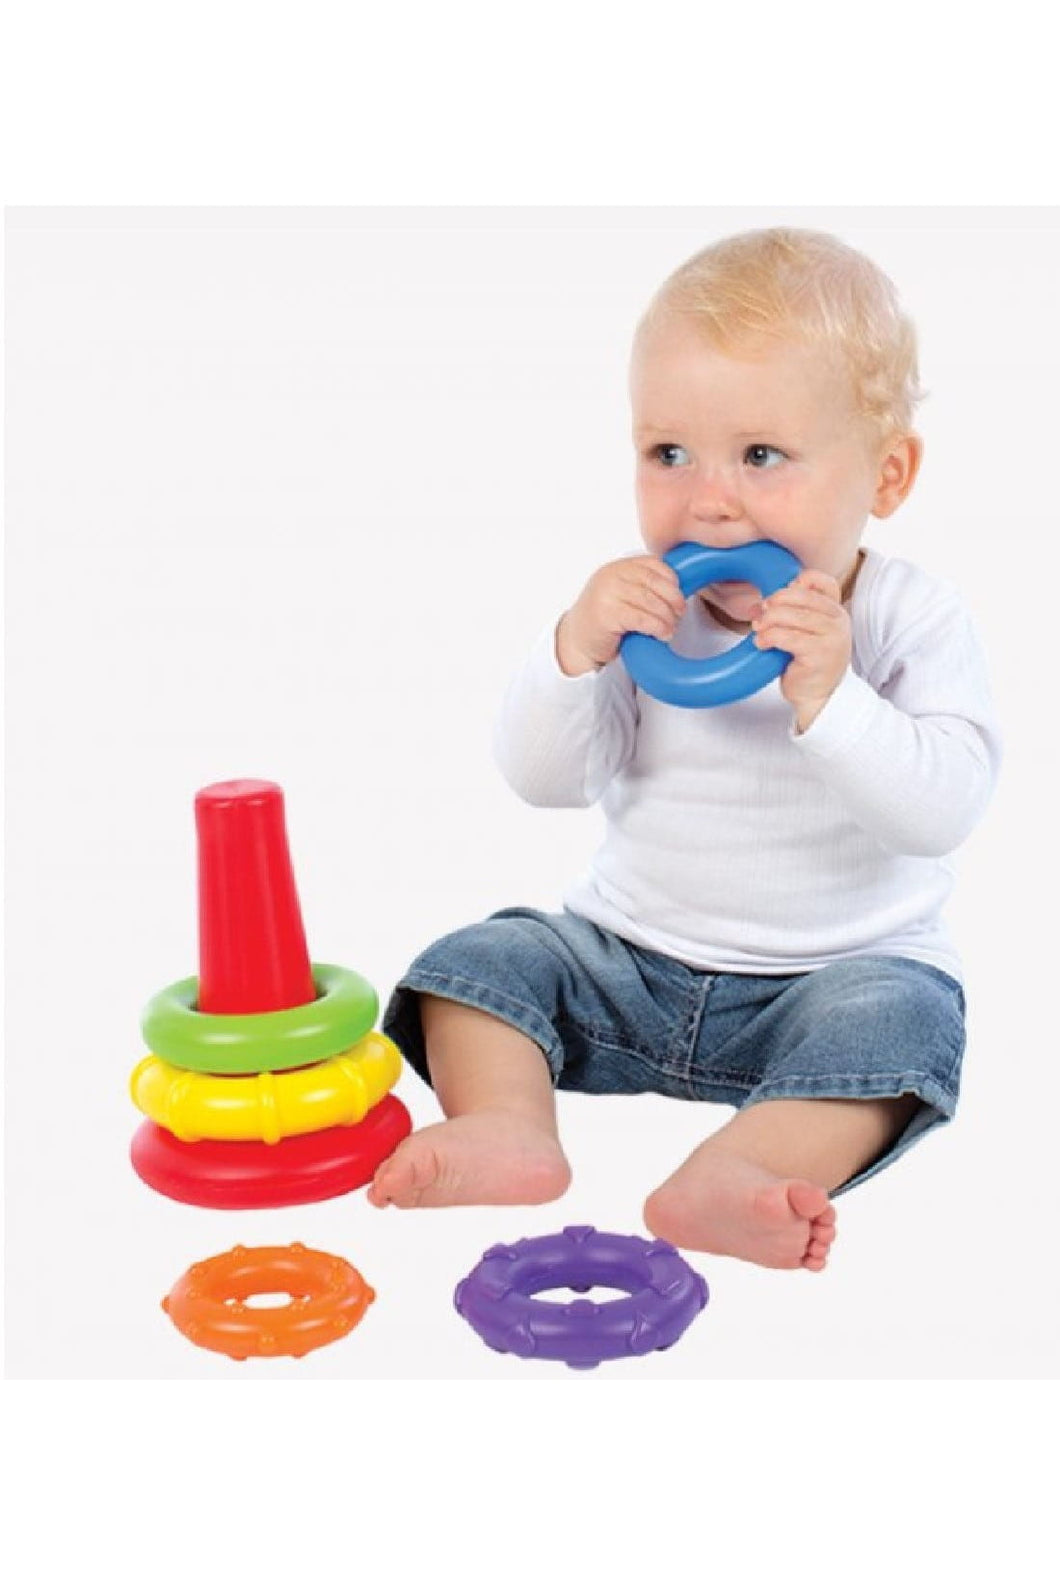 Playgro Sort And Stack Tower 1